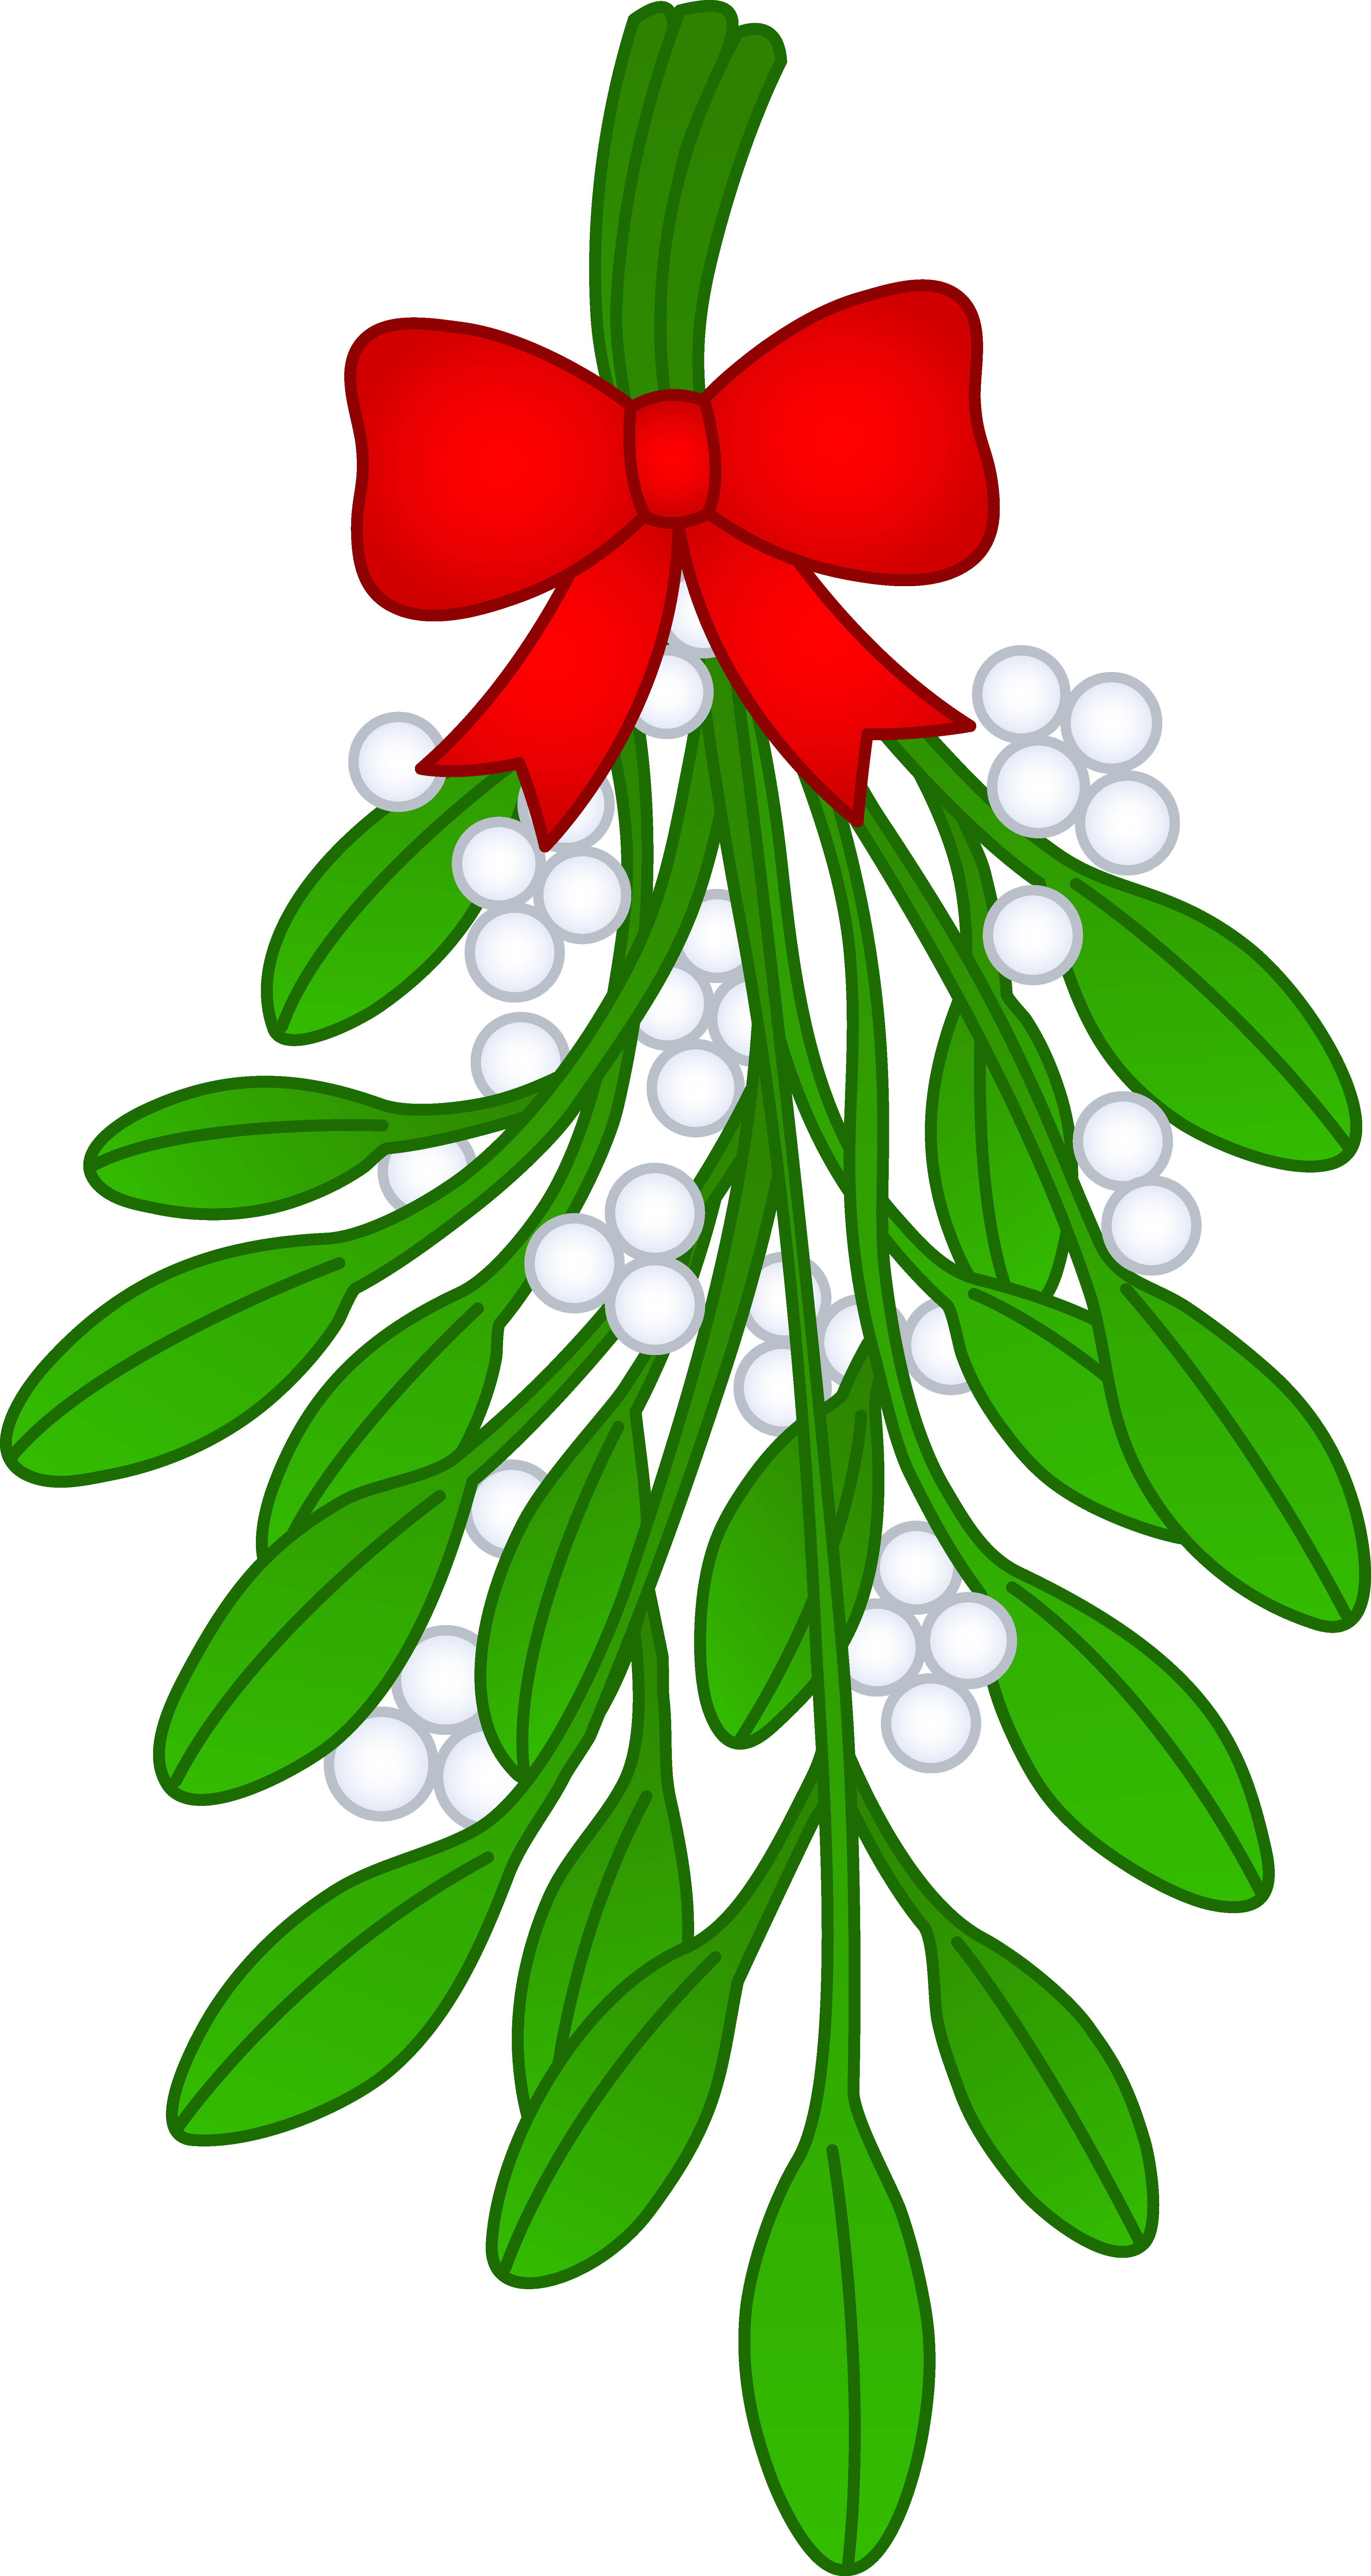 Christmas Mistletoe With Red Bow - Free Clip Art